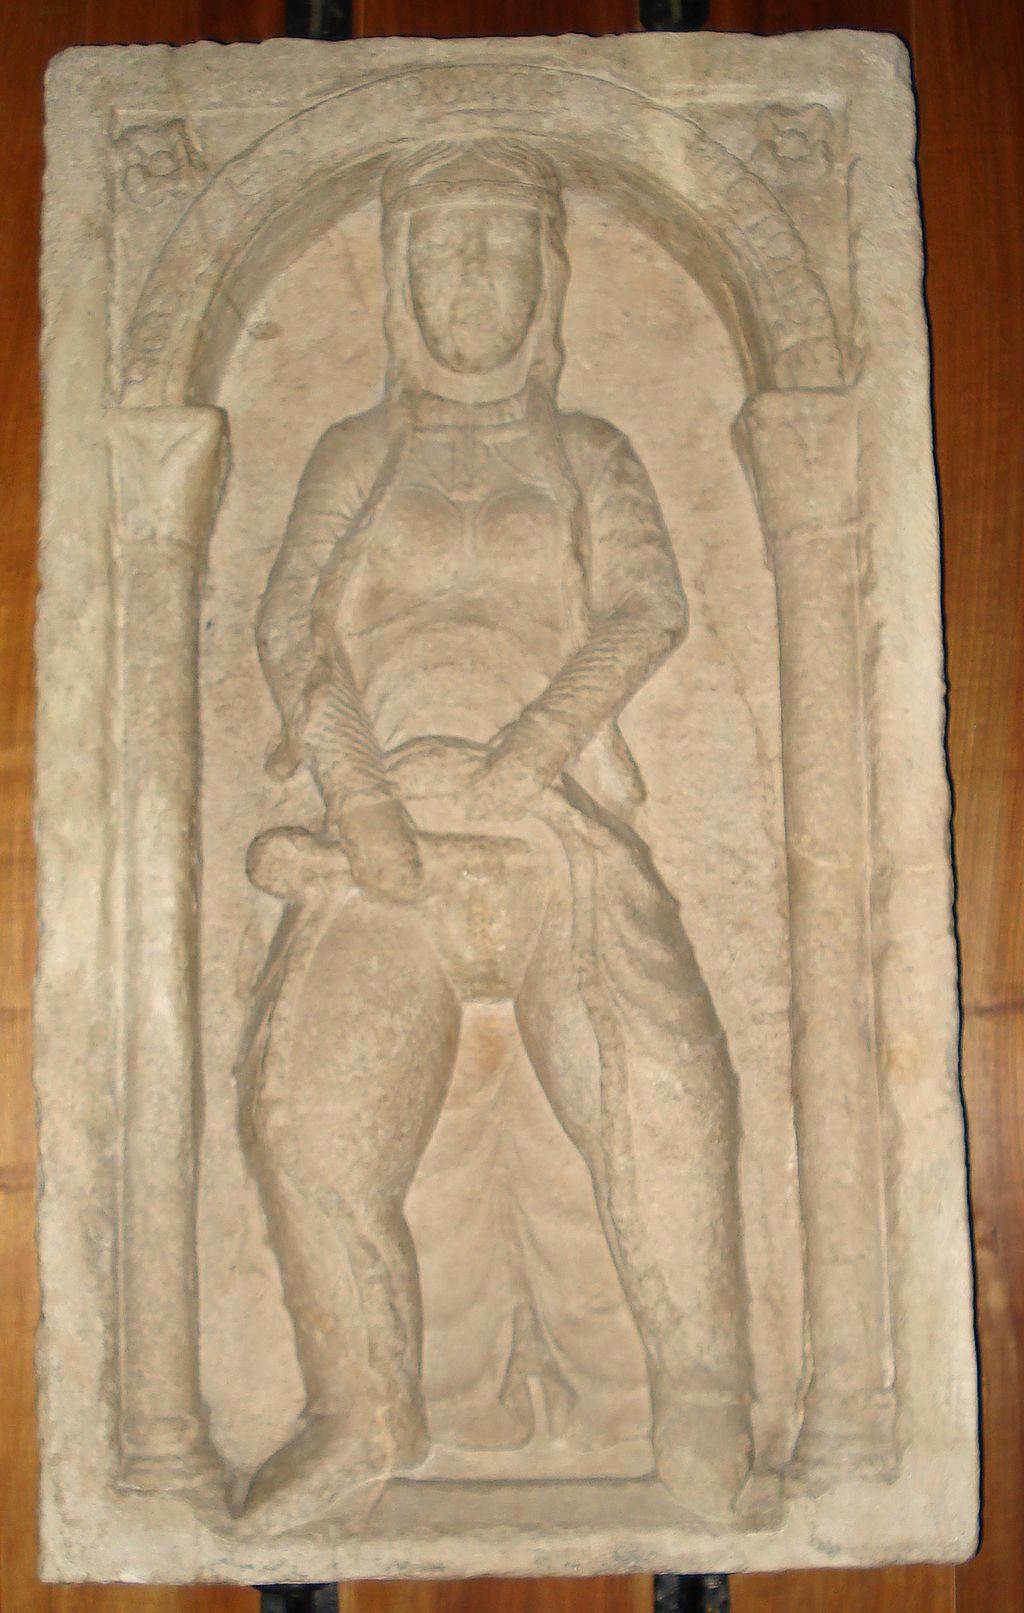 View of the low relief (G.dallorto, Attribution, via Wikimedia Commons)